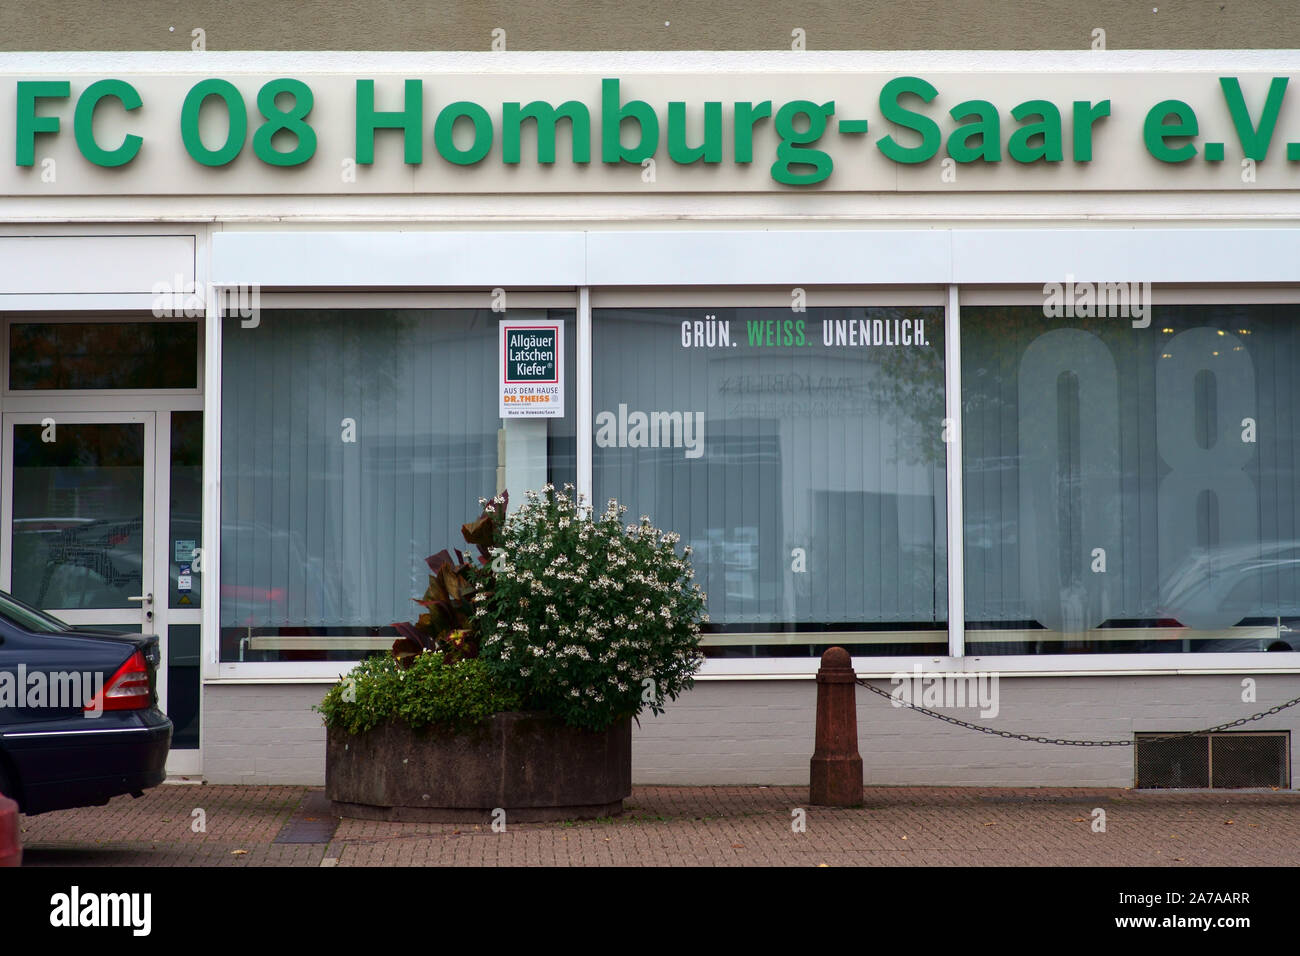 Homburg, Germany - October 19, 2019: The exterior facade of the office of the football club FC 08 Homburg-Saar e.V. with logo on October 19, 2019 in H Stock Photo